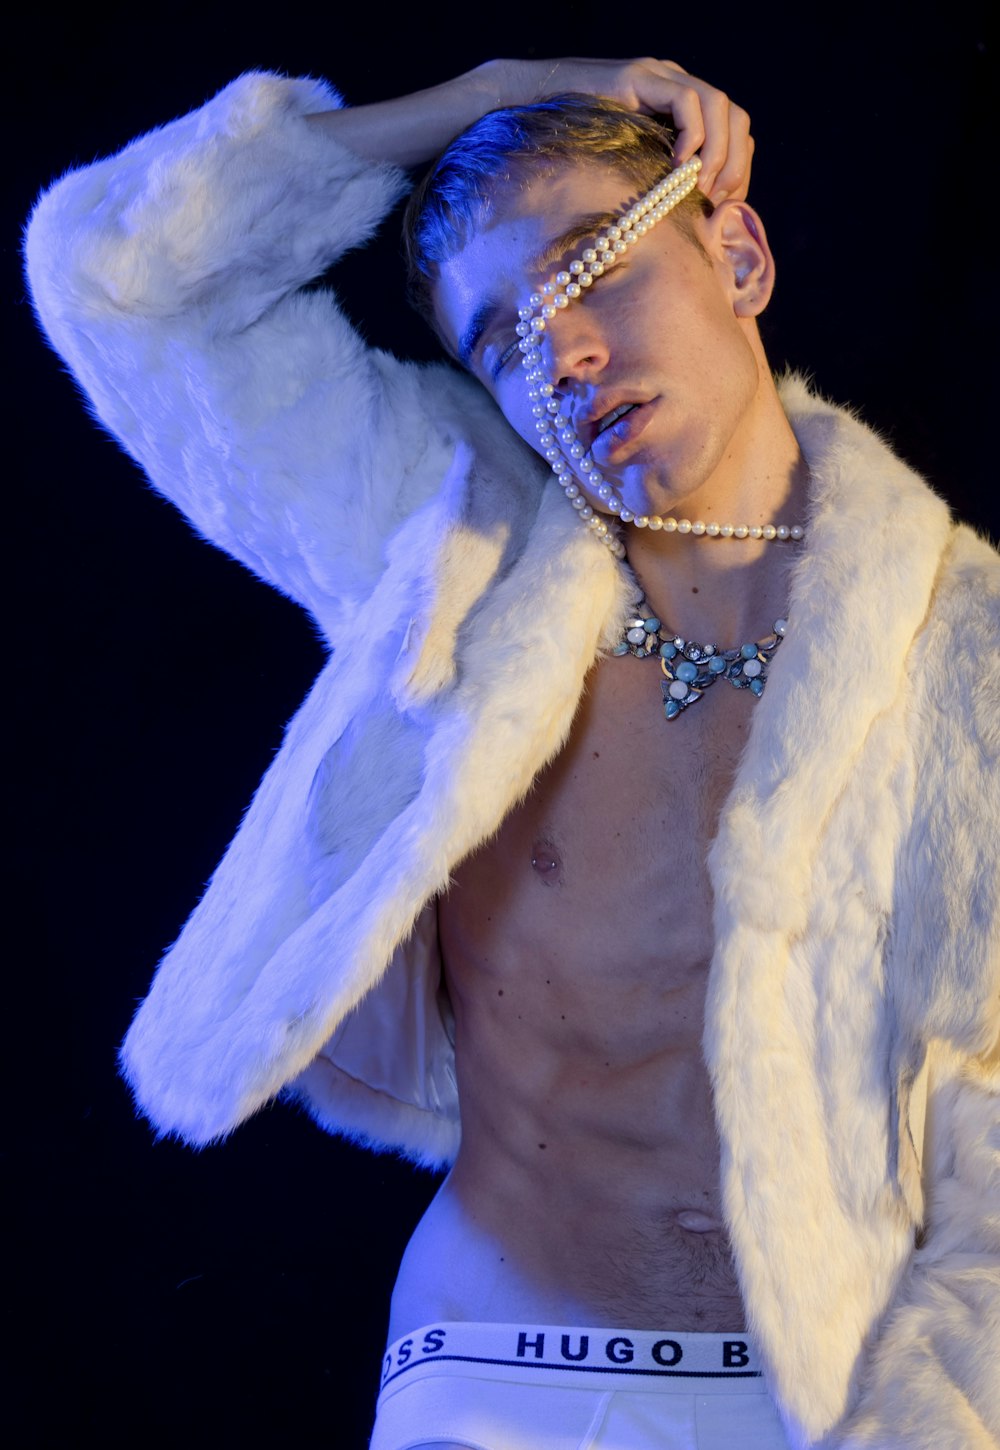 man wearing white fur jacket and white Hugo Boss brief standing while putting white pearl necklace on his head